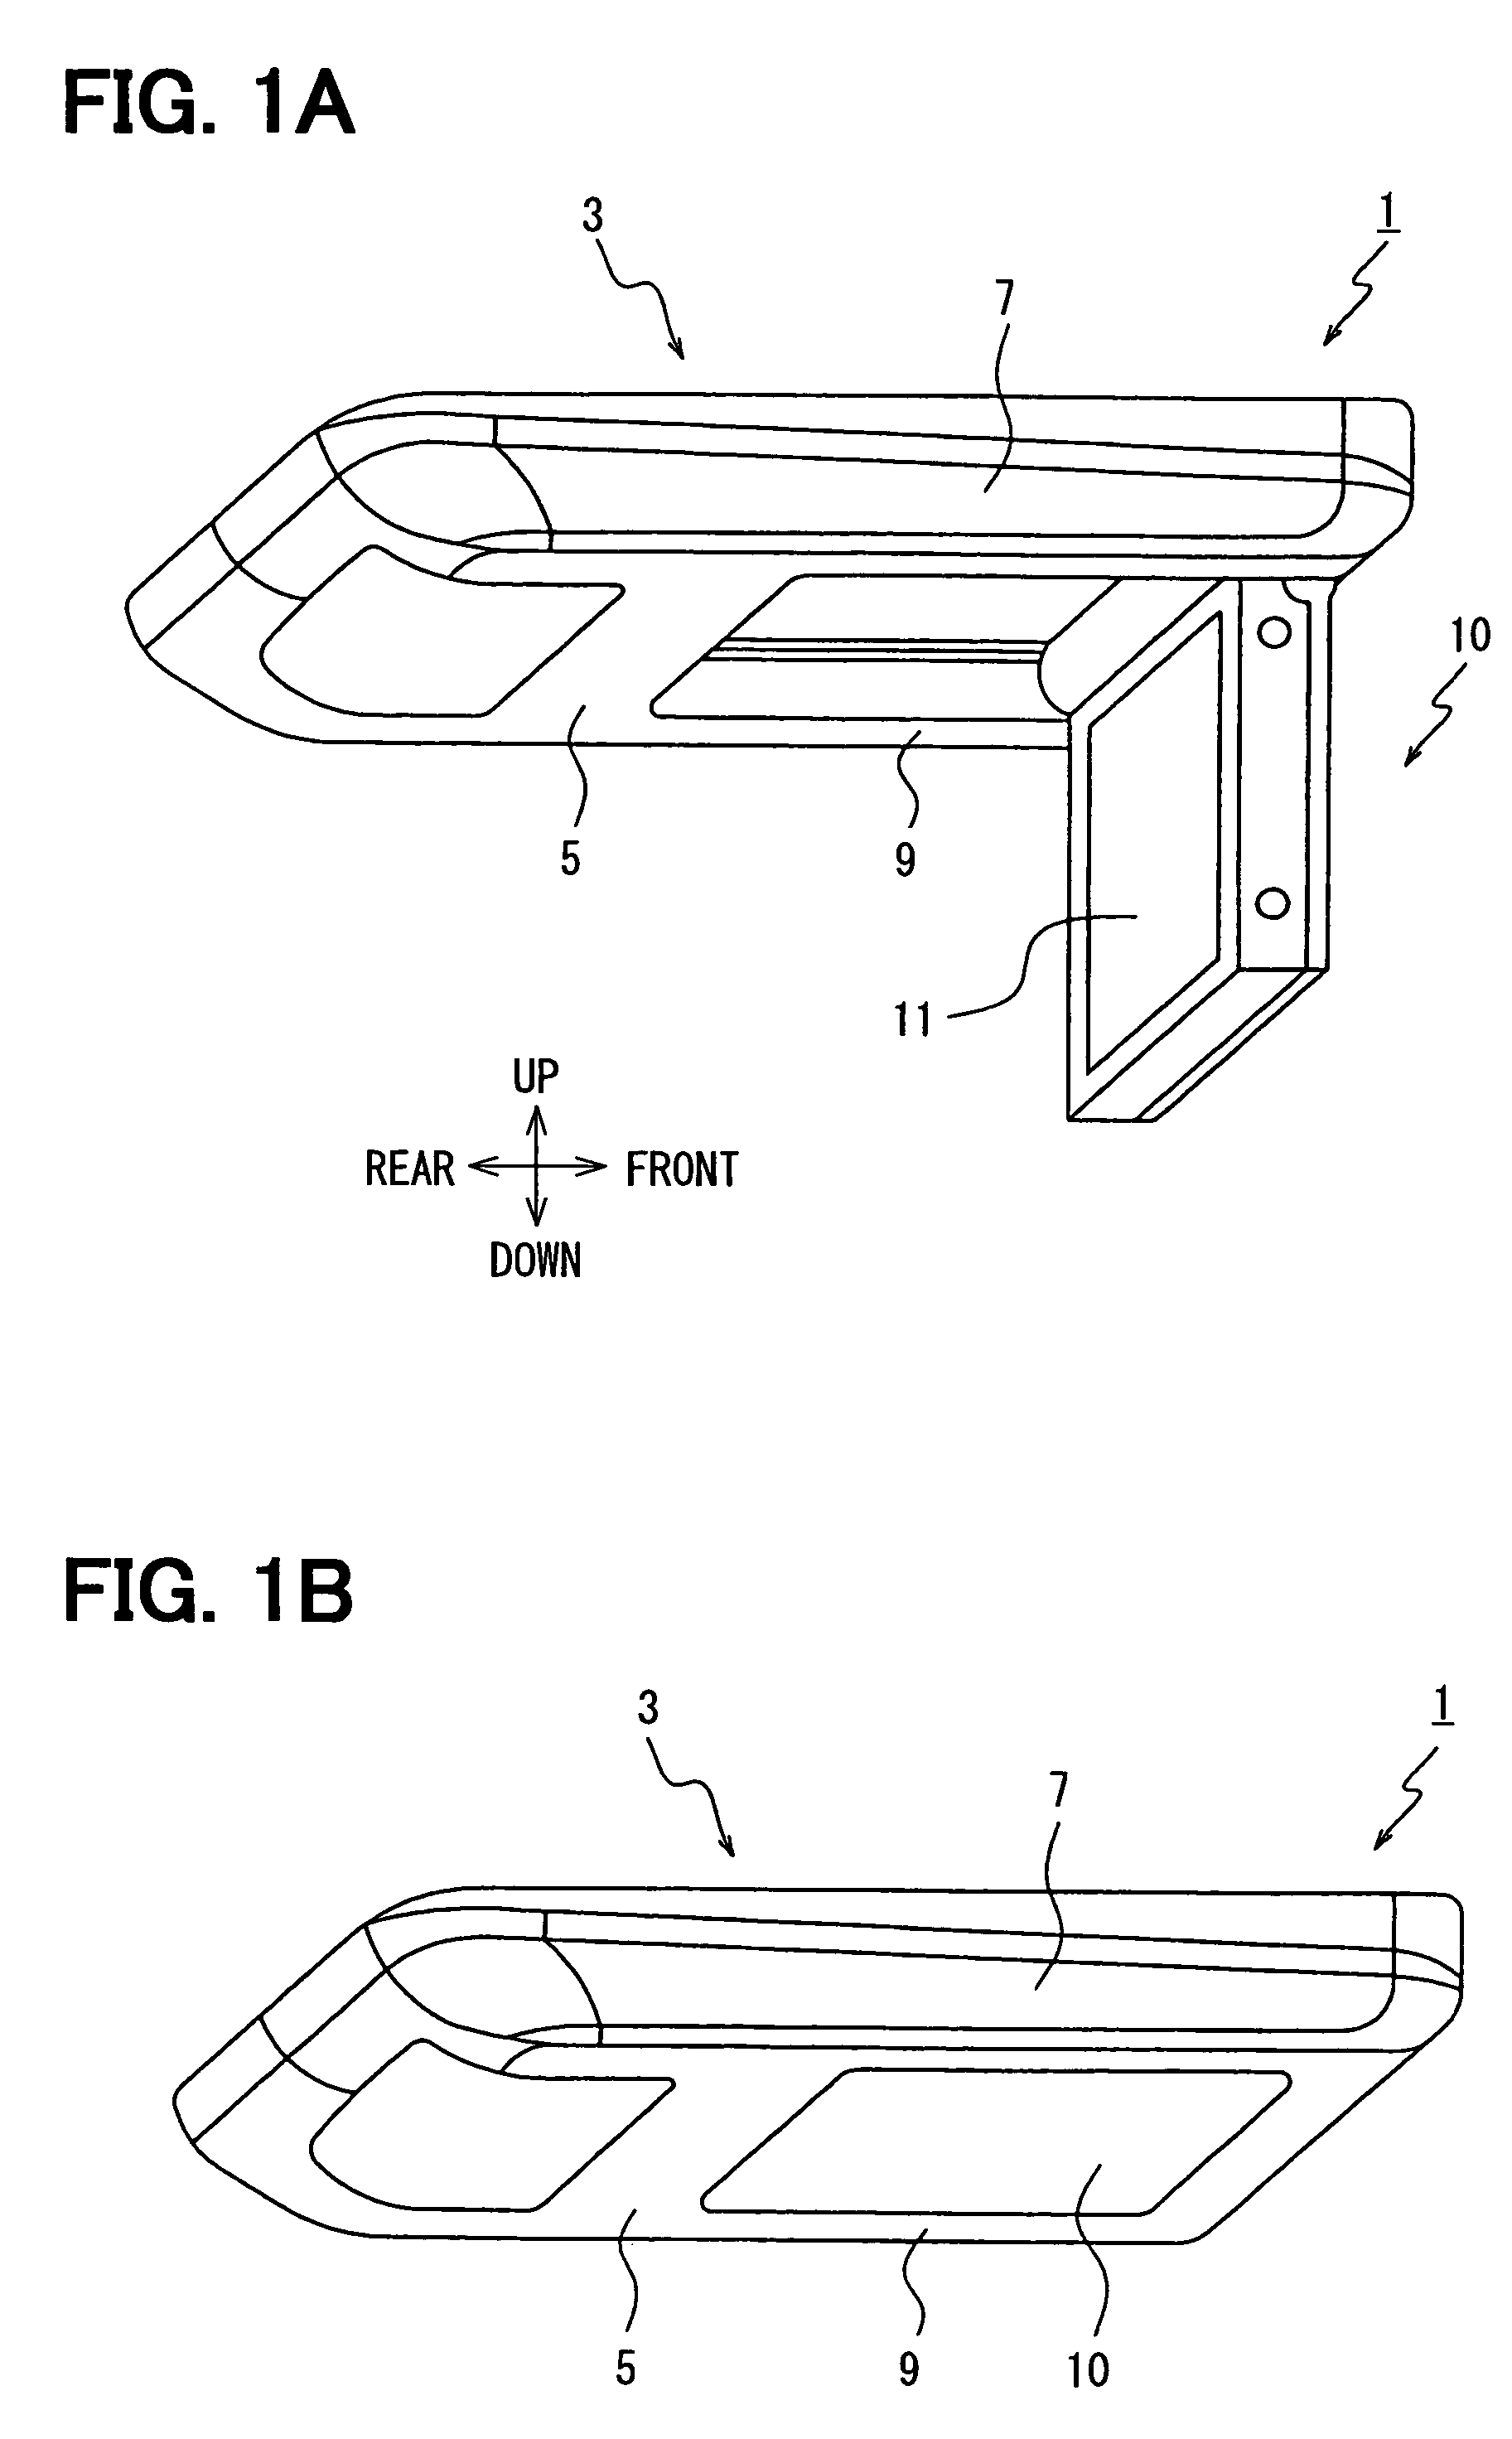 Display apparatus having mechanism for opening and closing display panel